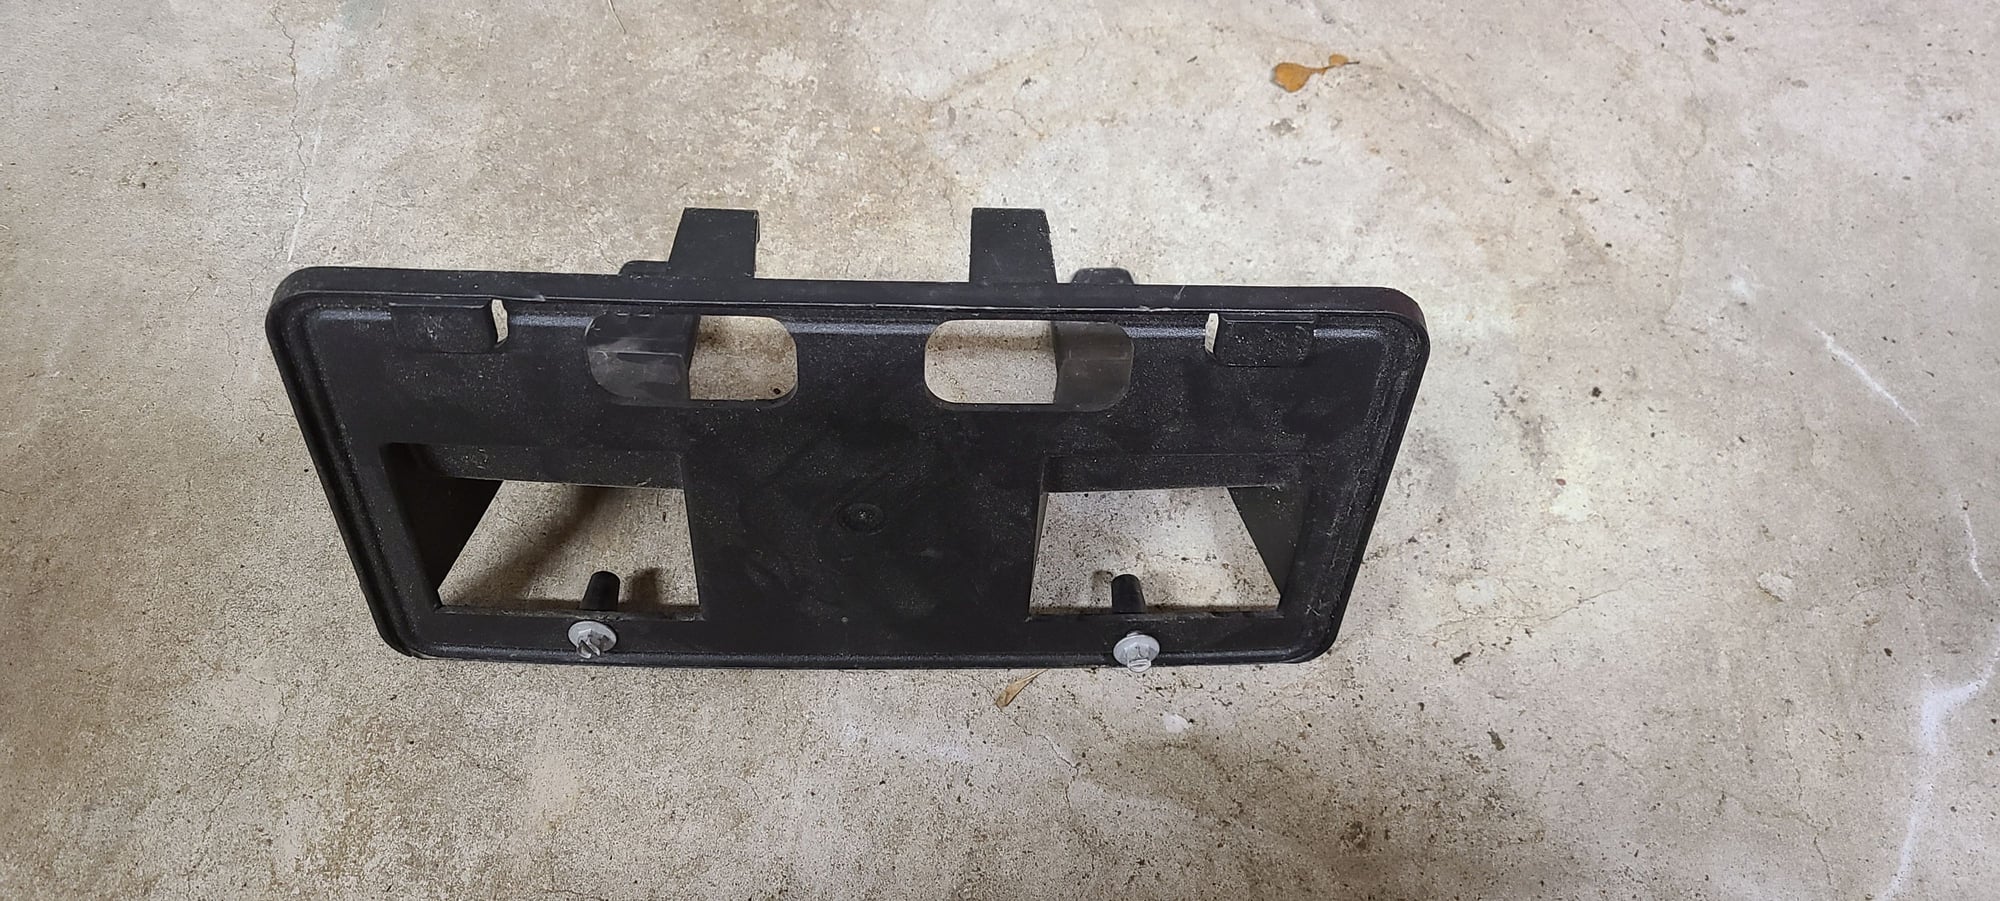 Exterior Body Parts - 2020 front license plate frame - Used - 2020 to 2021 Ford F-250 Super Duty - Lamarque, TX 77568, United States